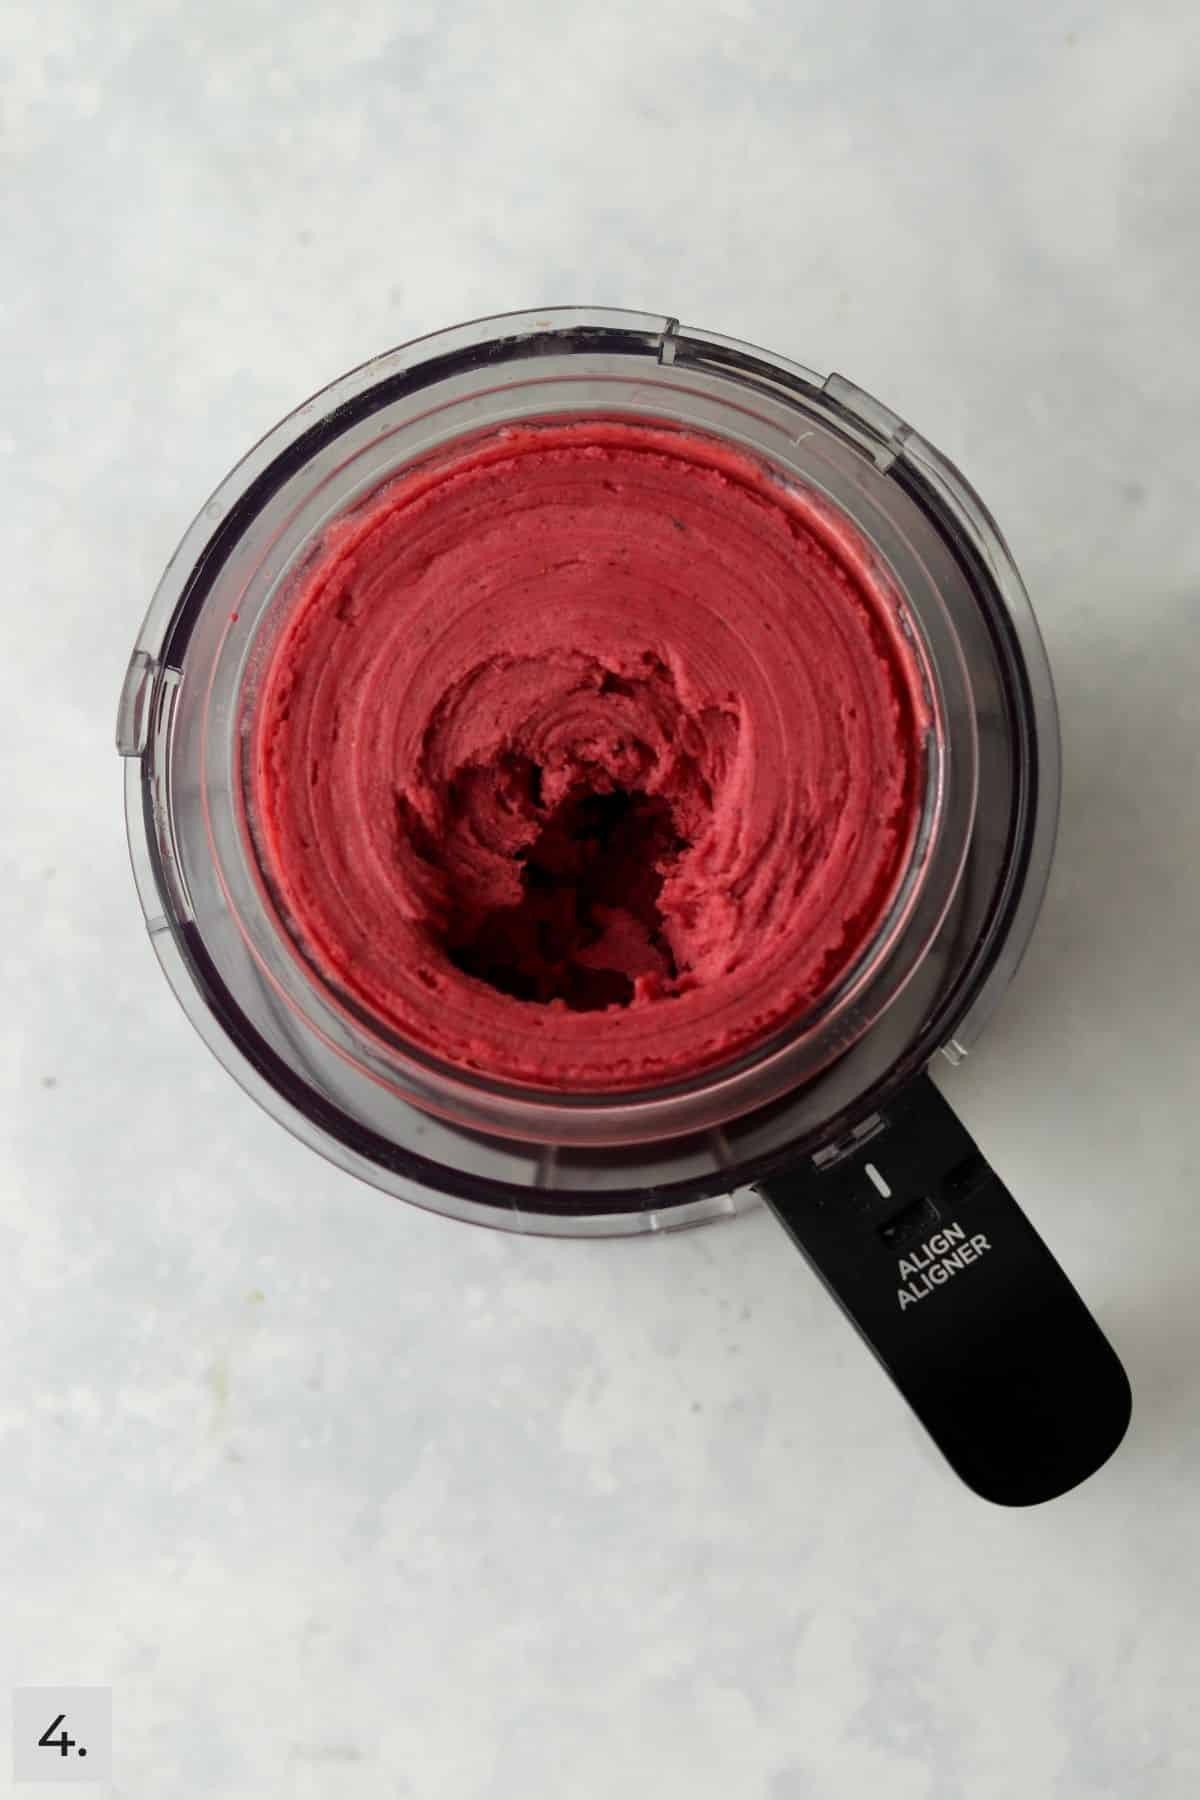 Ninja Creami Mixed Berry Sorbet after two spins and has a creamy texture.